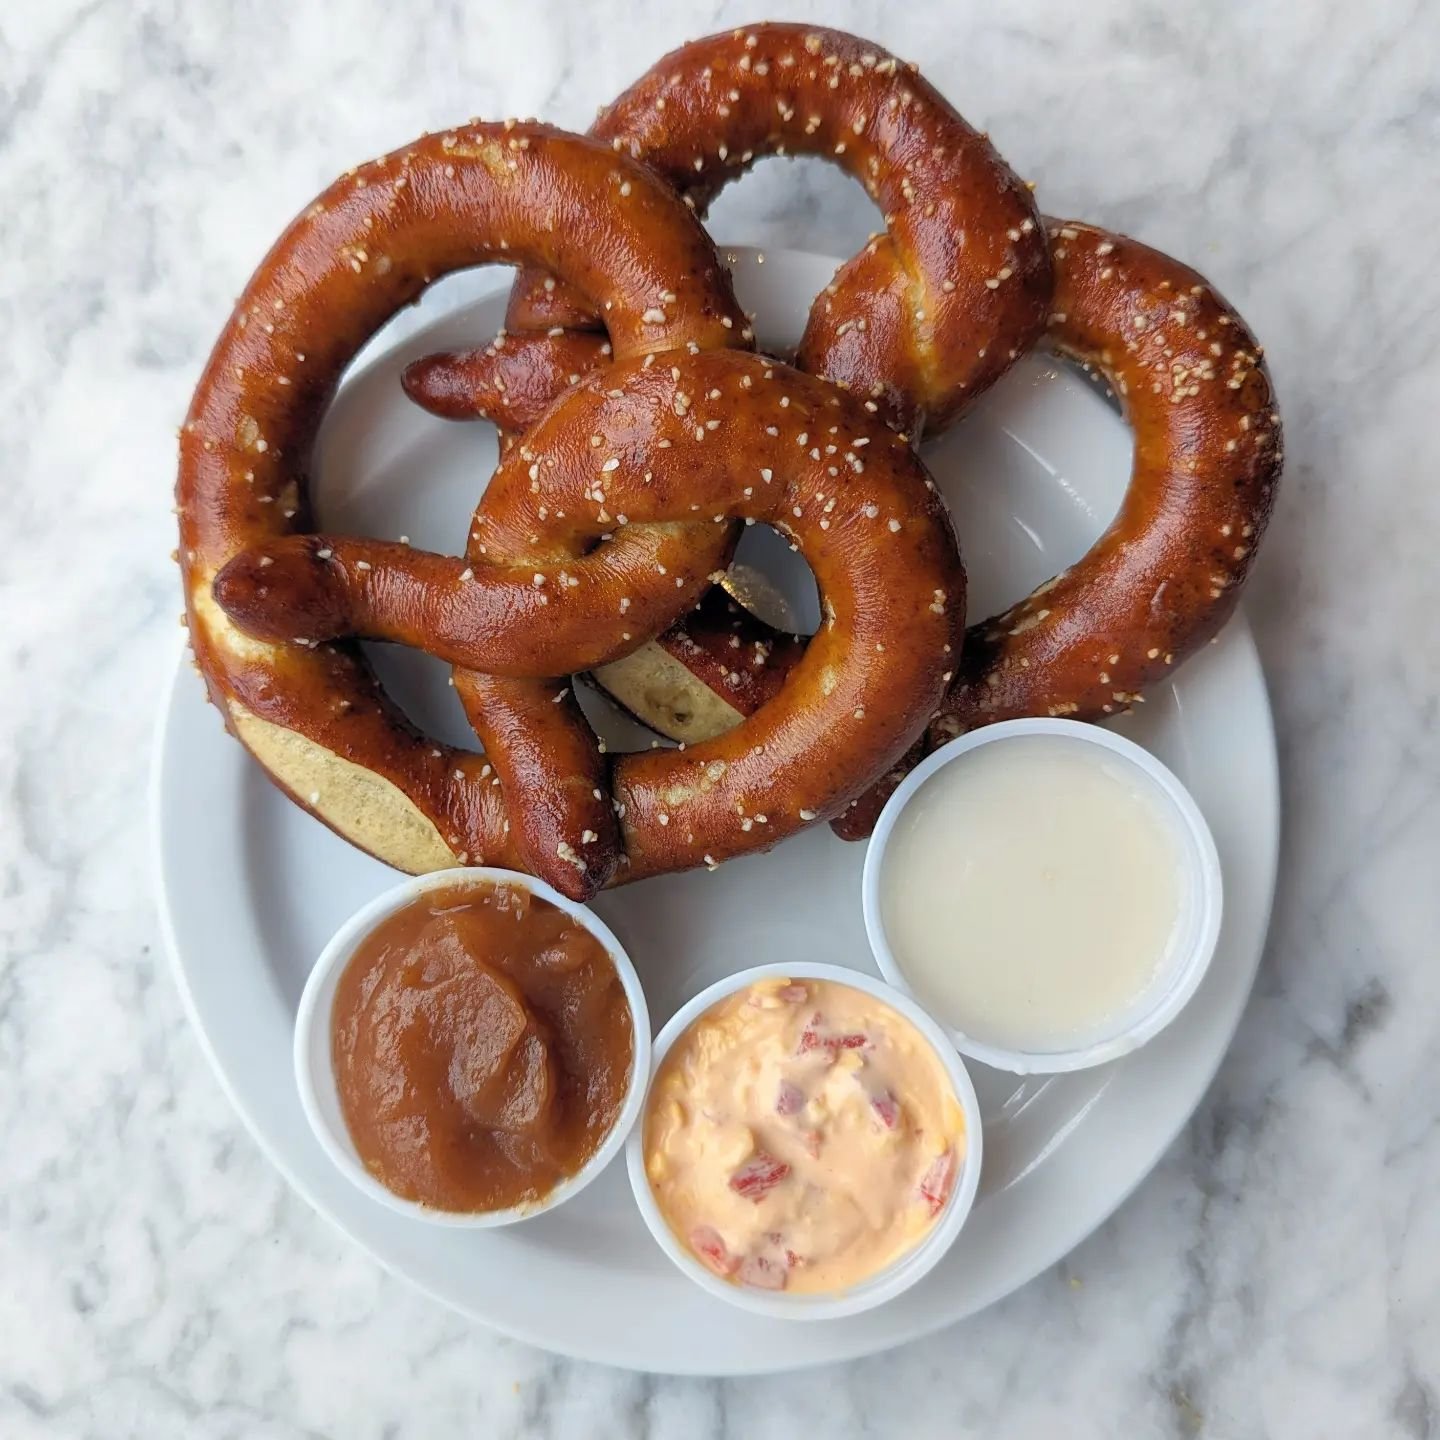 Sarkozy pretzels! Available at the bakery this Sunday along with the return of Kalamazoo blues legend Tom Duffield!

We'll have some Sunday breakfast favorites, nests, quiche, and pastries. But if you've always dreamed of a brunch pretzel -OH! Today 